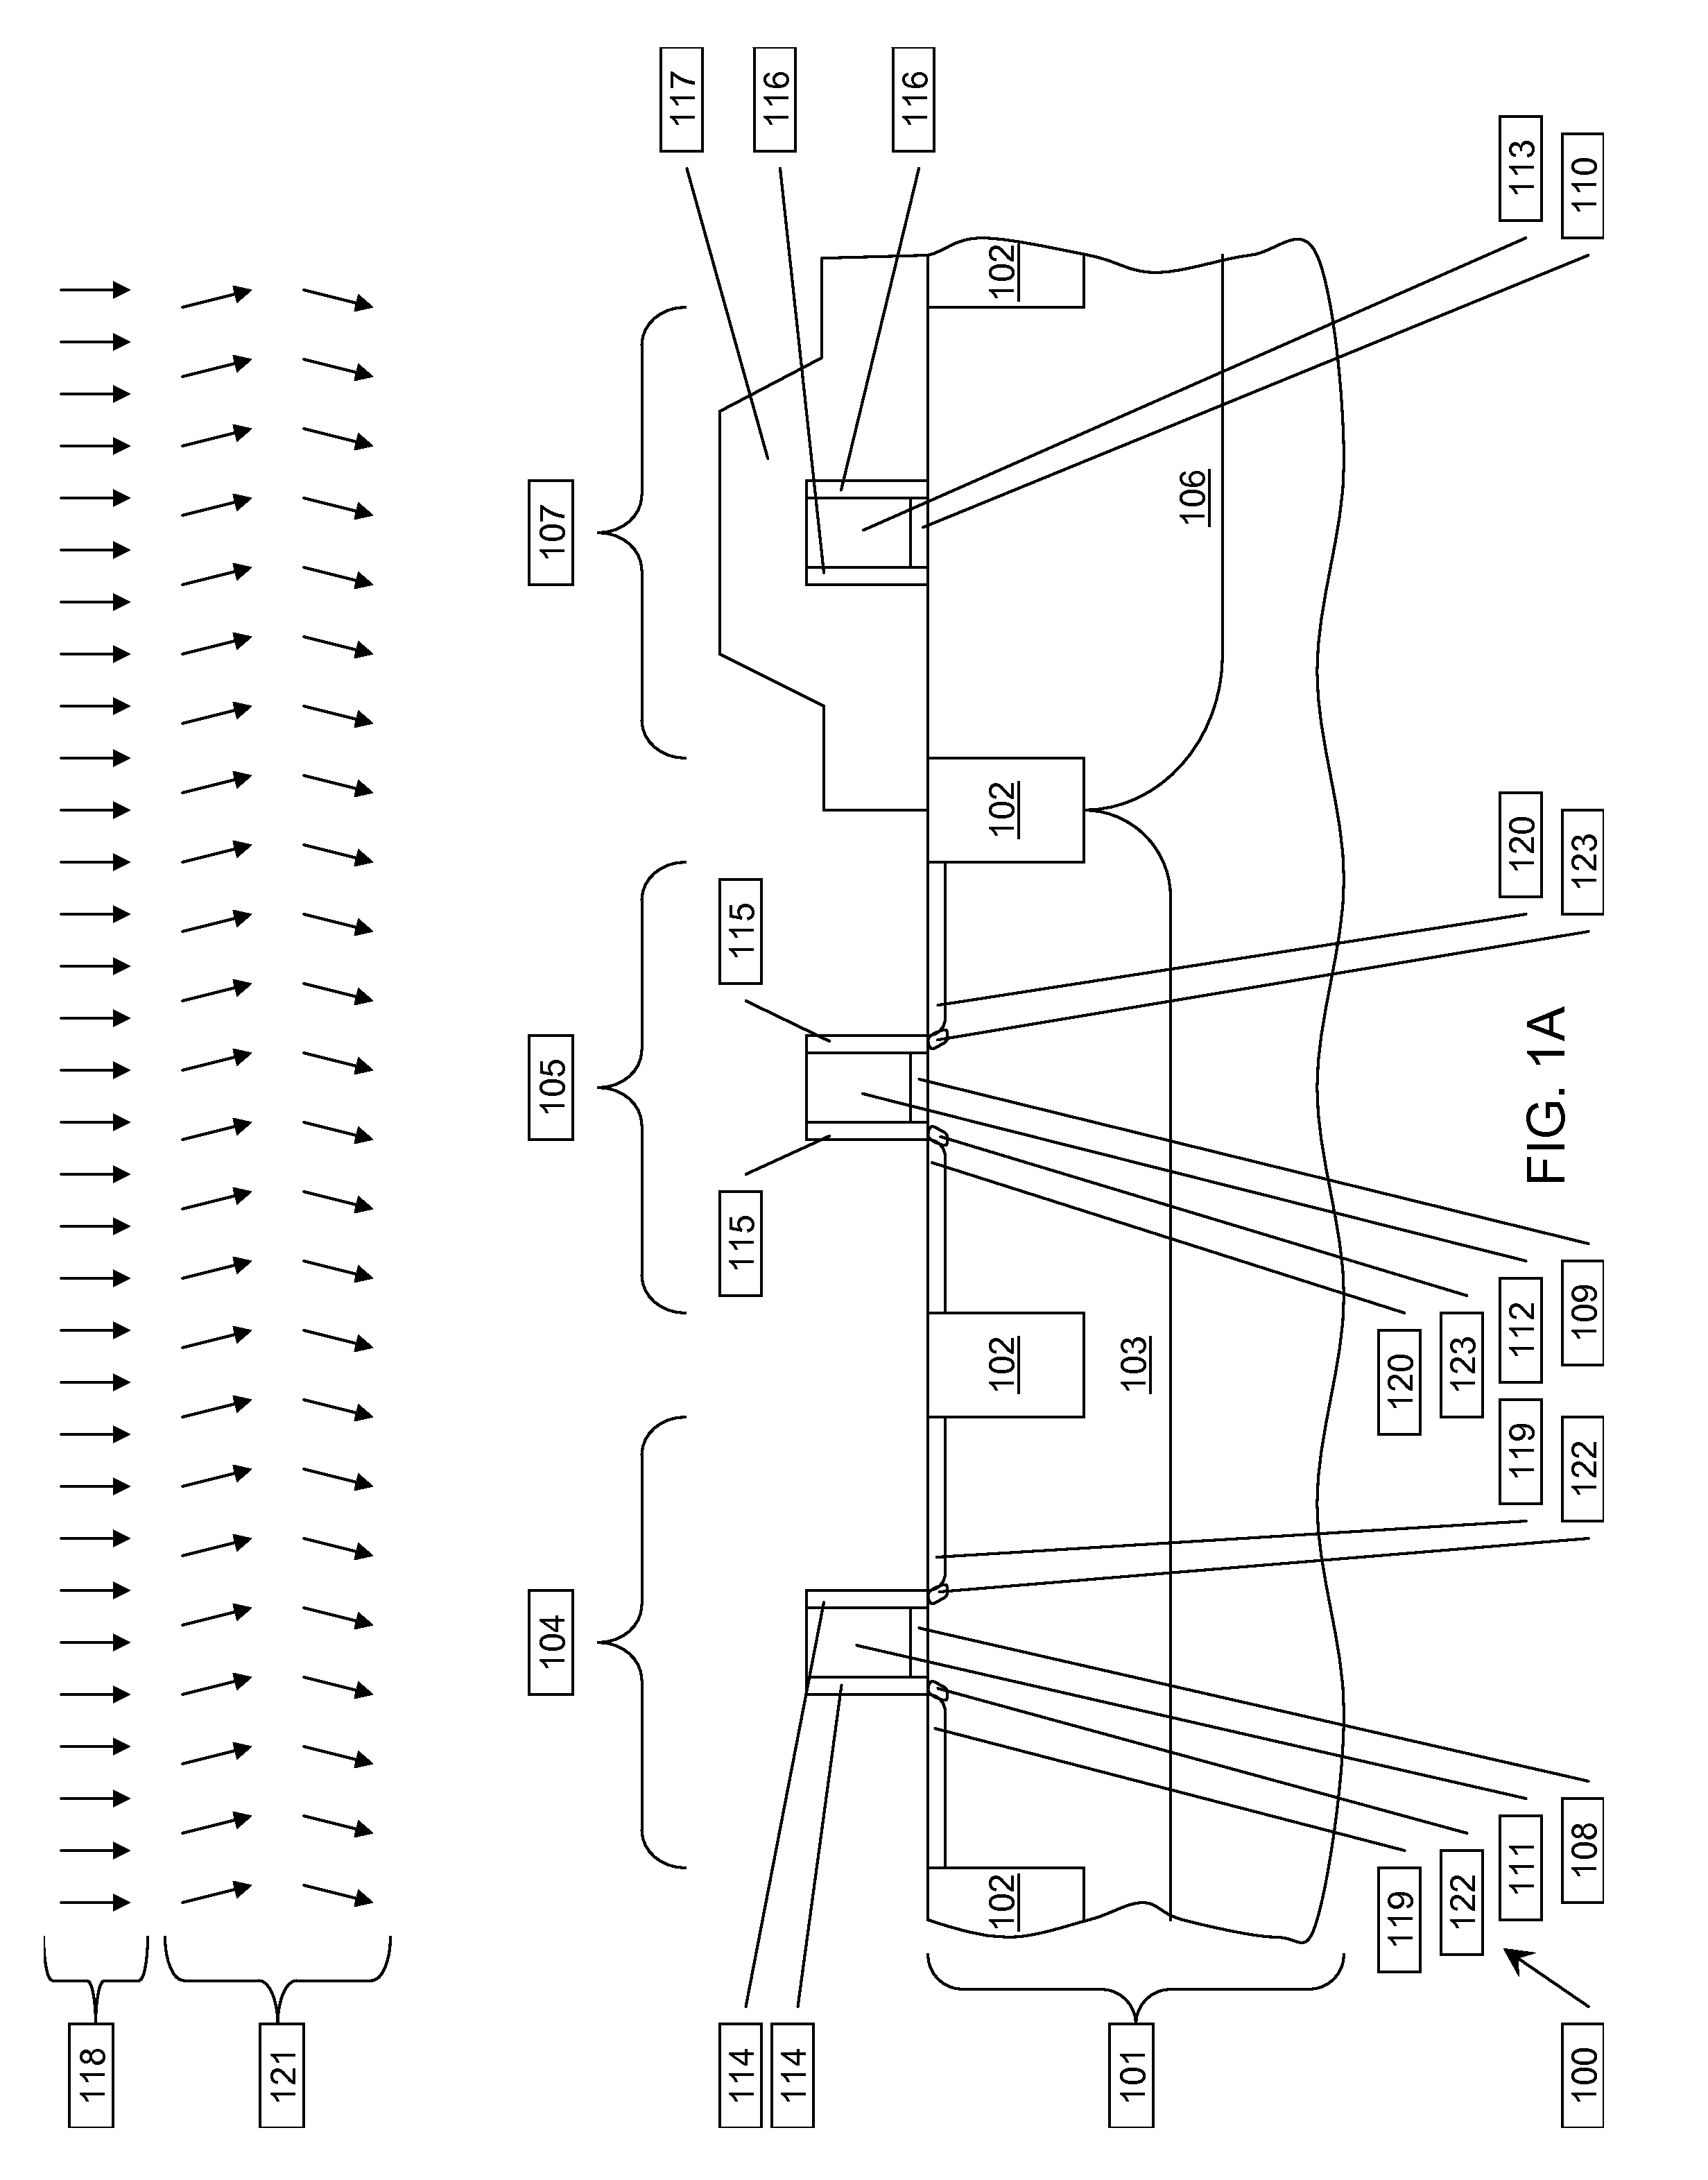 Gated Quantum Resonant Tunneling Diode Using CMOS Transistor with Modified Pocket and LDD Implants